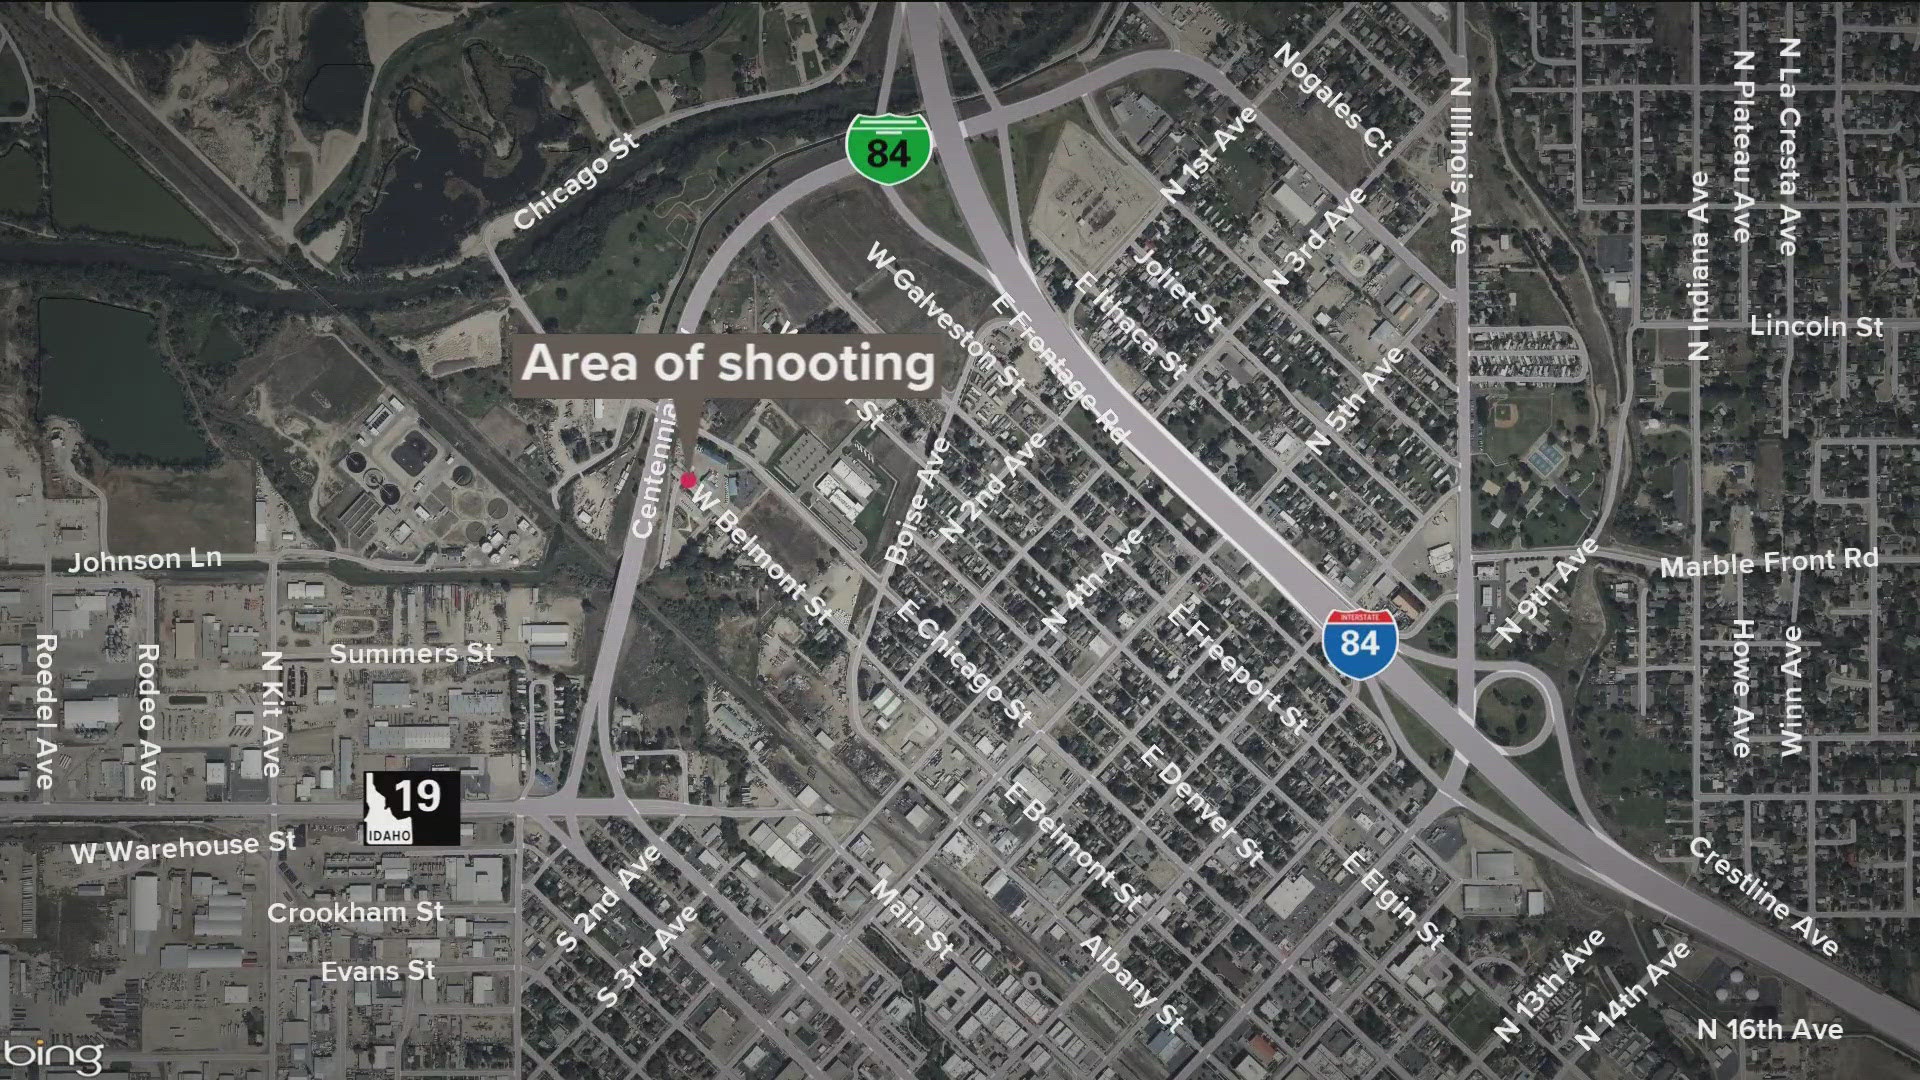 CPD said a newly installed gunshot detection system called "Flock" aided in the arrests.